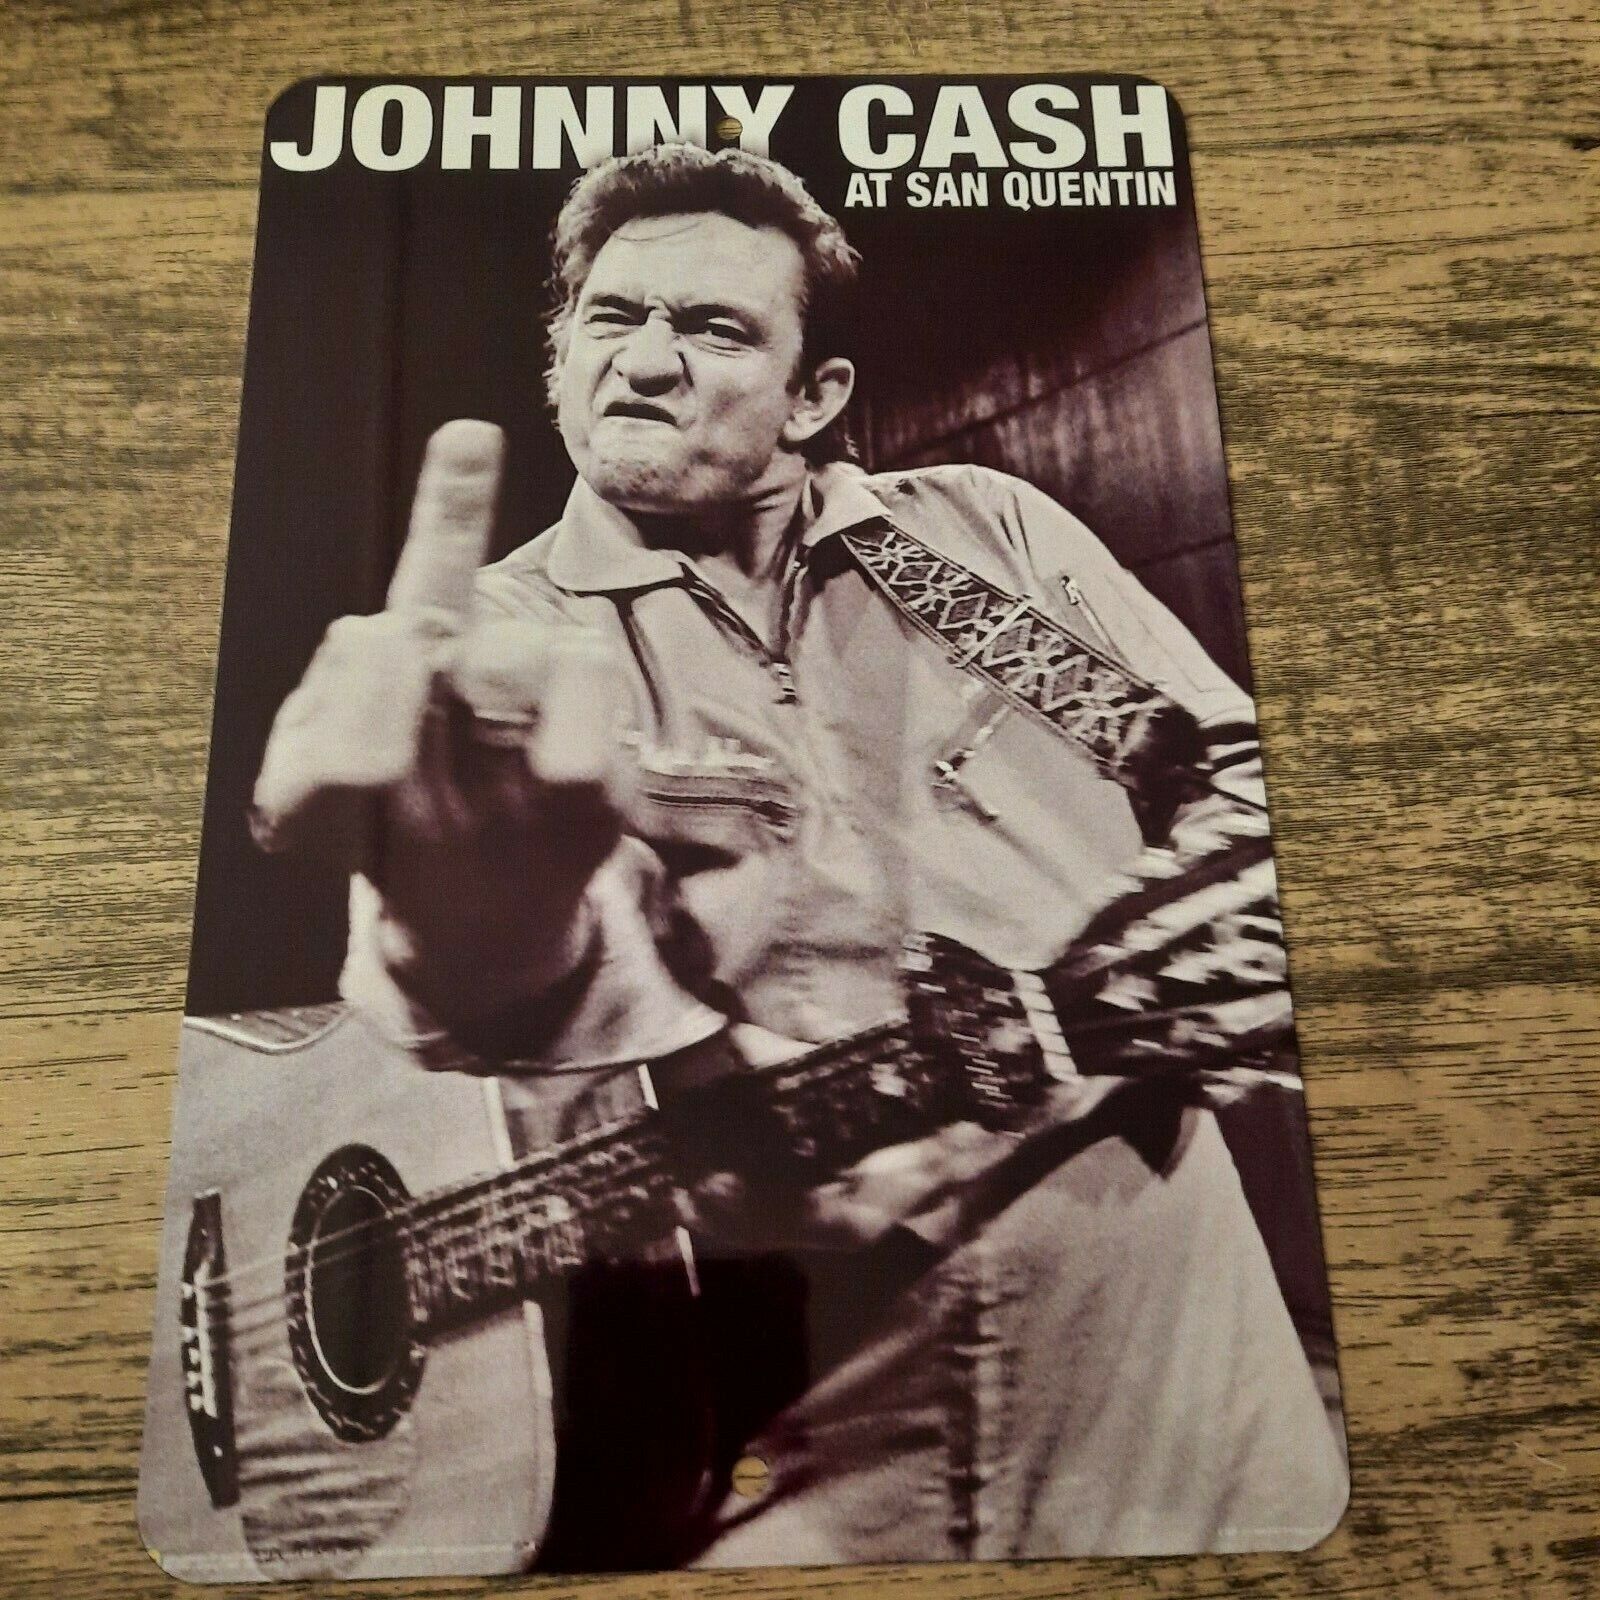 Johnny Cash at San Quentin 8x12 Metal Wall Sign